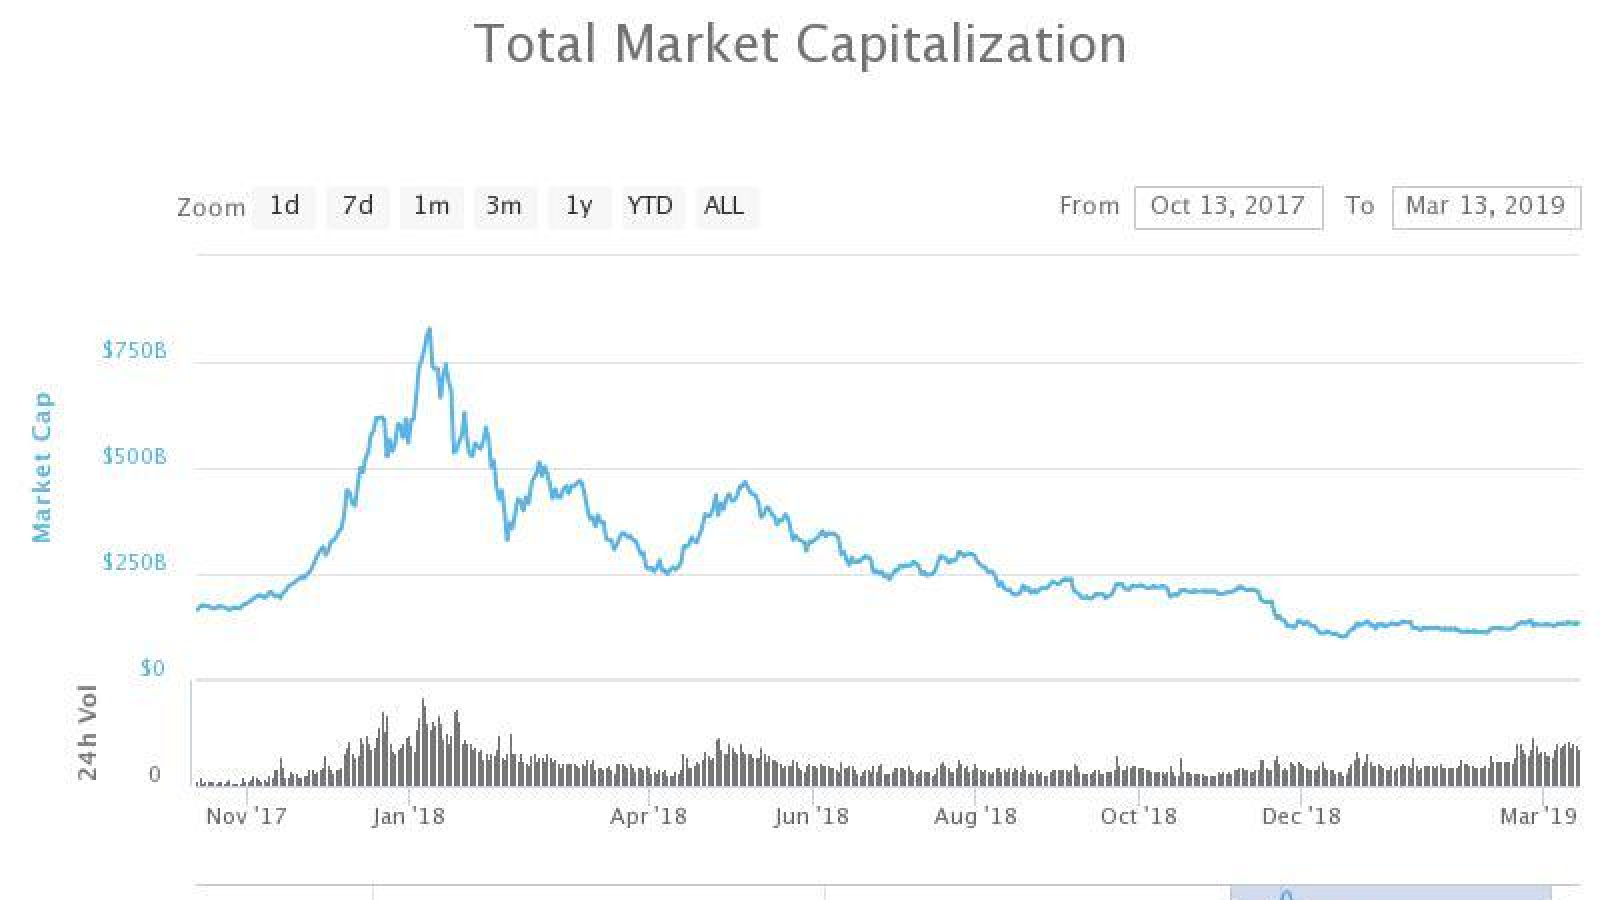 Bitcoin Carnage “Much More Attractive” for Institutions, Big Inflow Expected